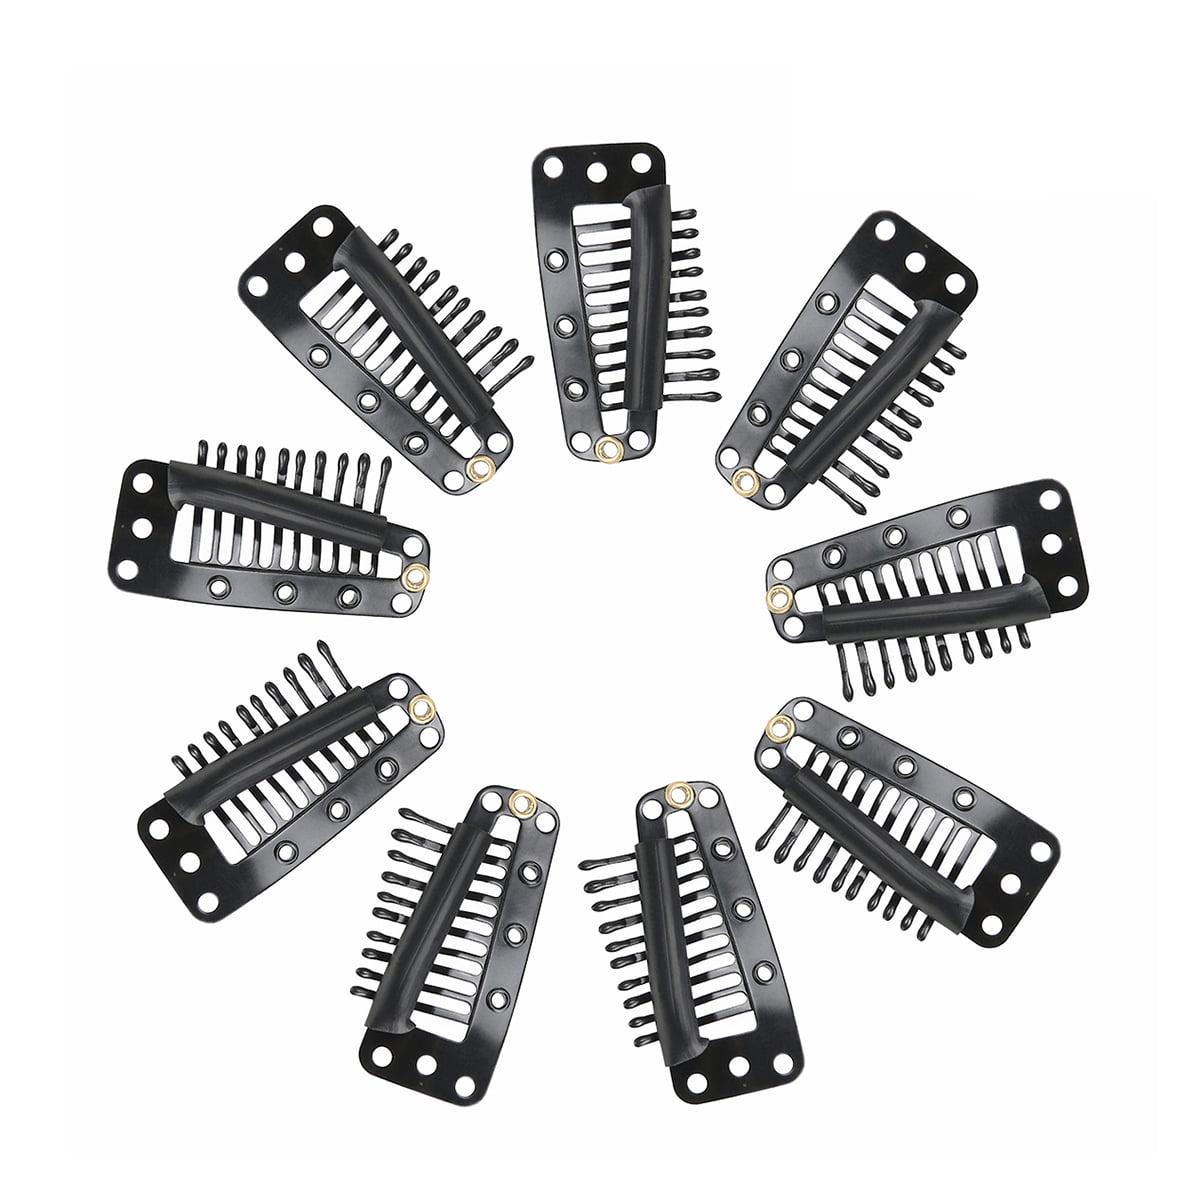 20pcs Fashion Women's 10 Teeth Snap-Comb Wig Clips with Rubber Back Tan 